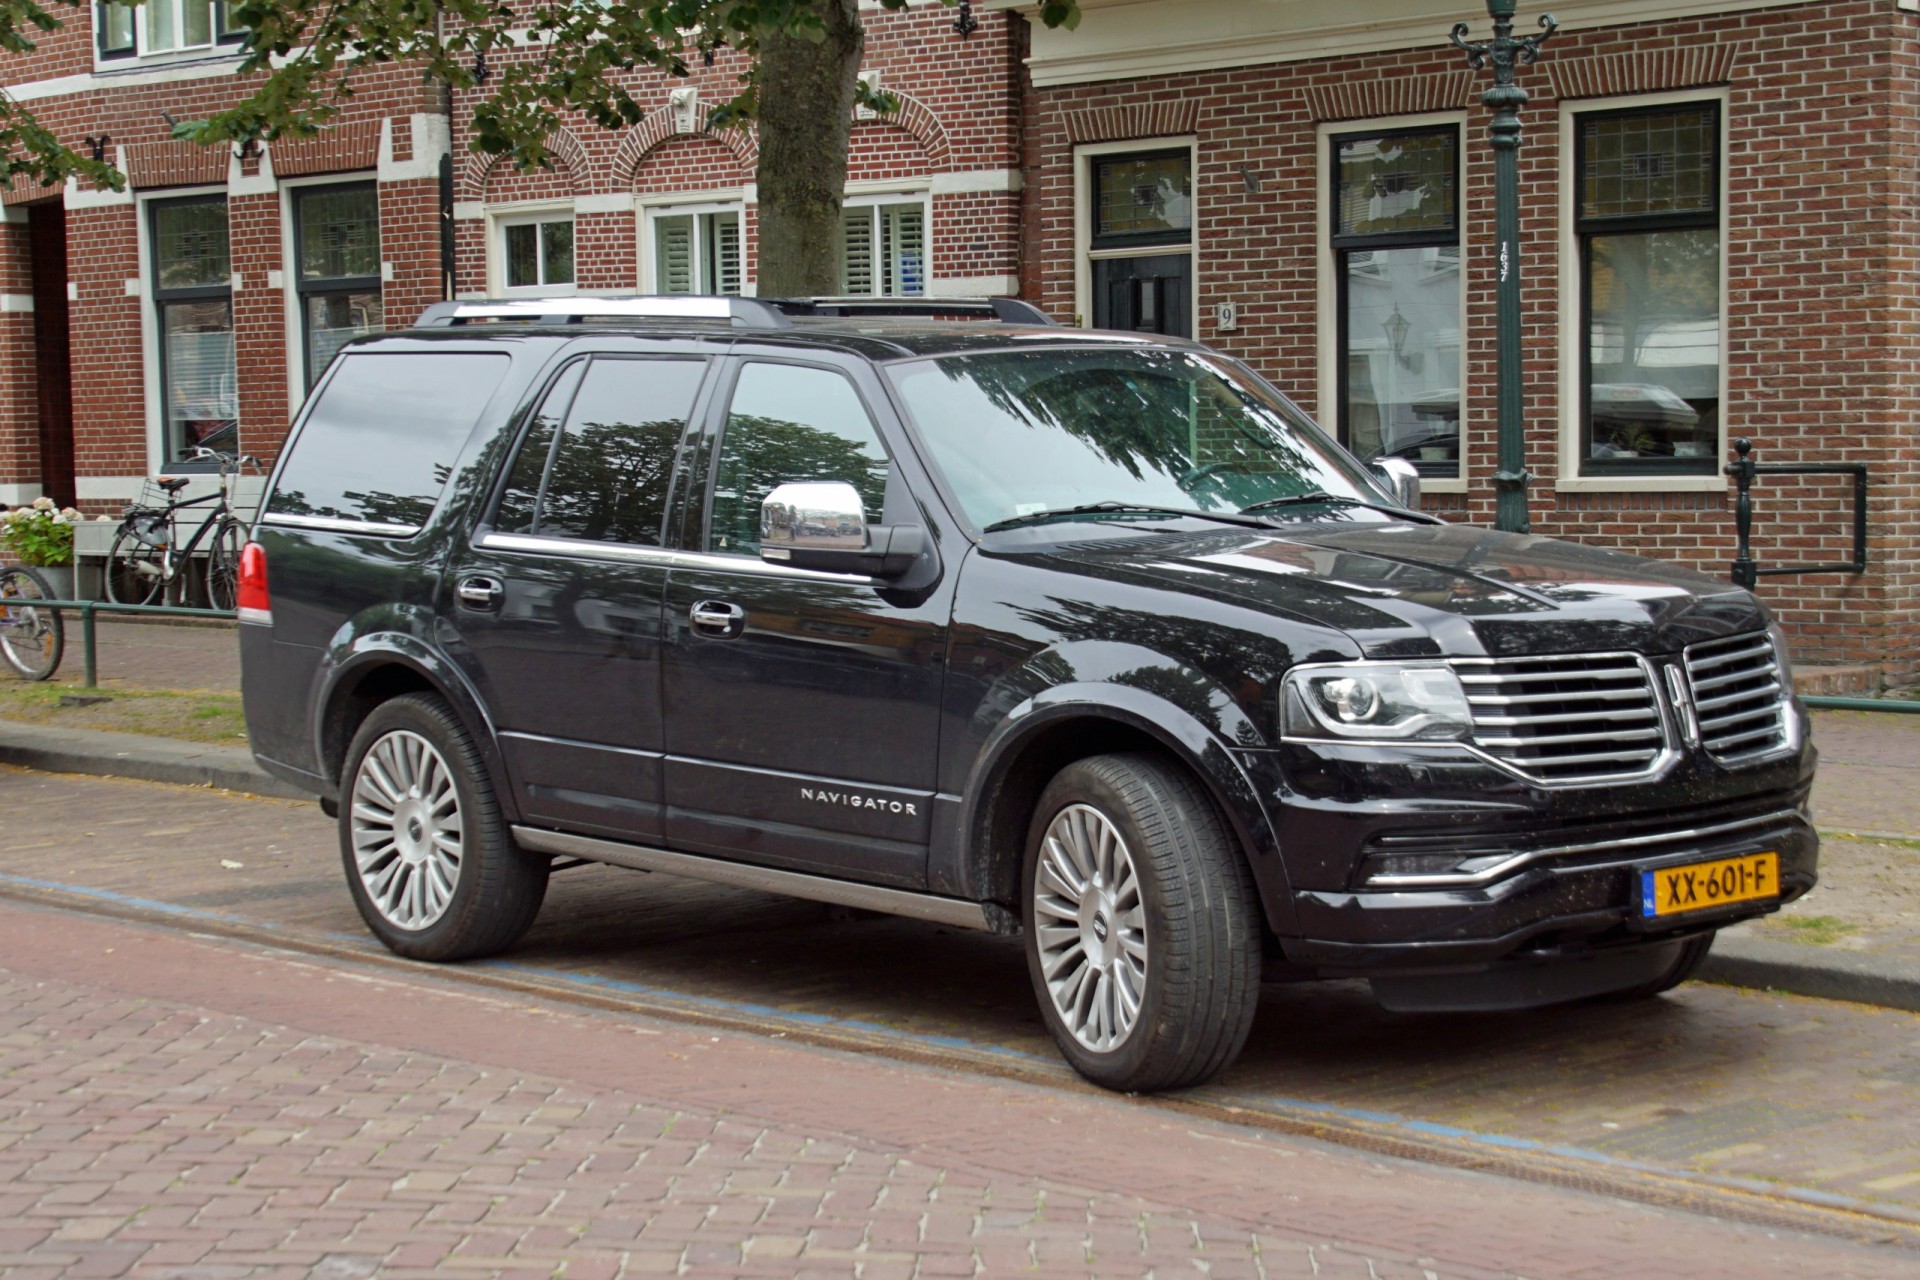 Black 2015 Lincoln Navigator parked by the side of the road. Nobody in the vehicle.